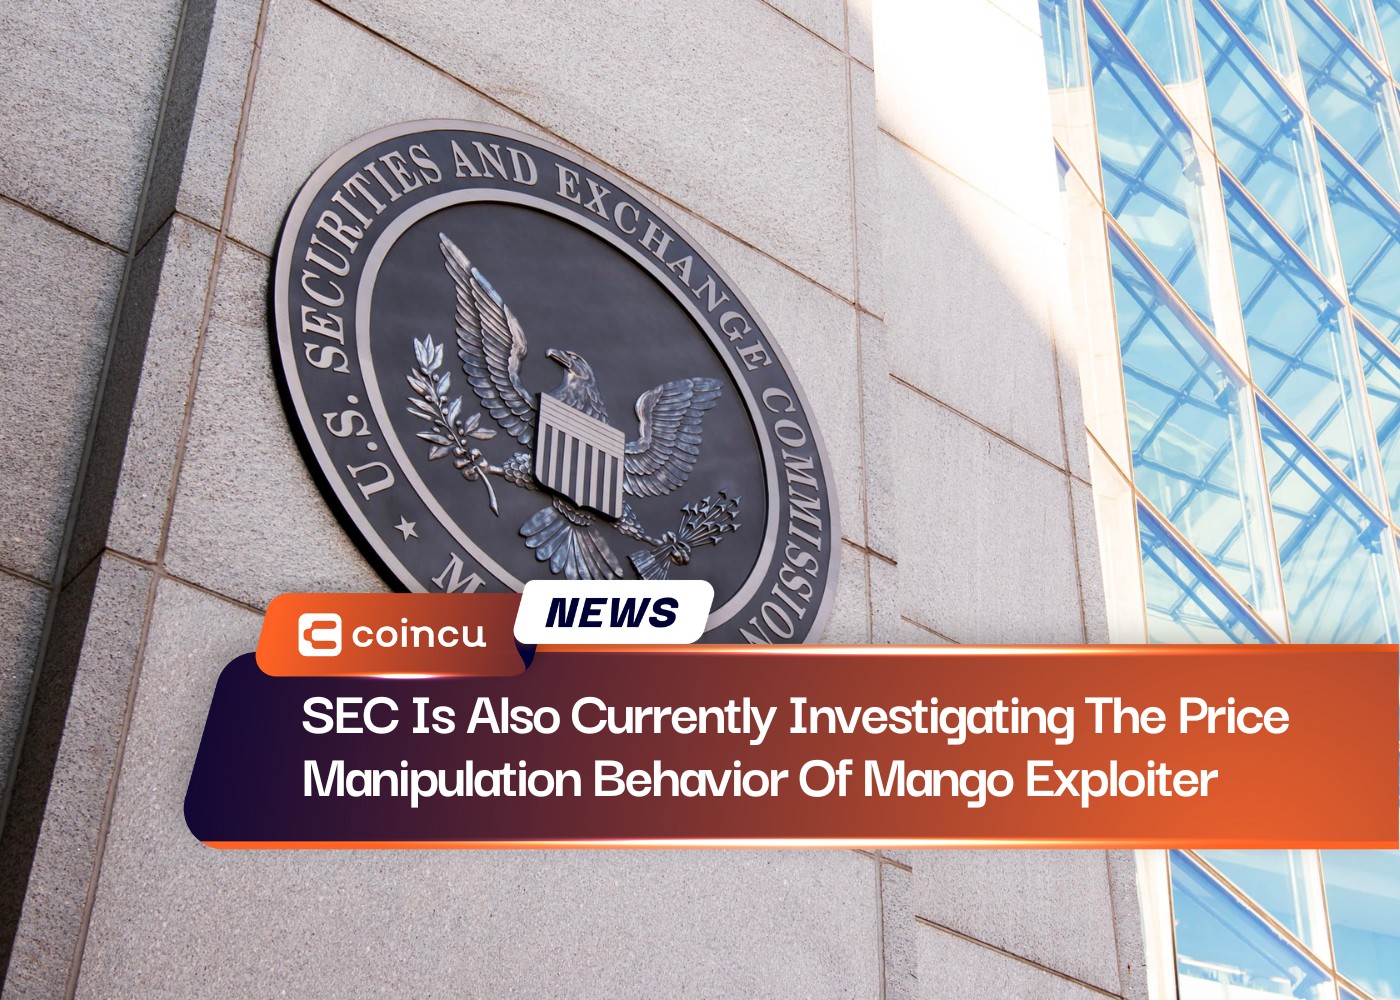 SEC Is Also Currently Investigating The Price Manipulation Behavior Of Mango Exploiter